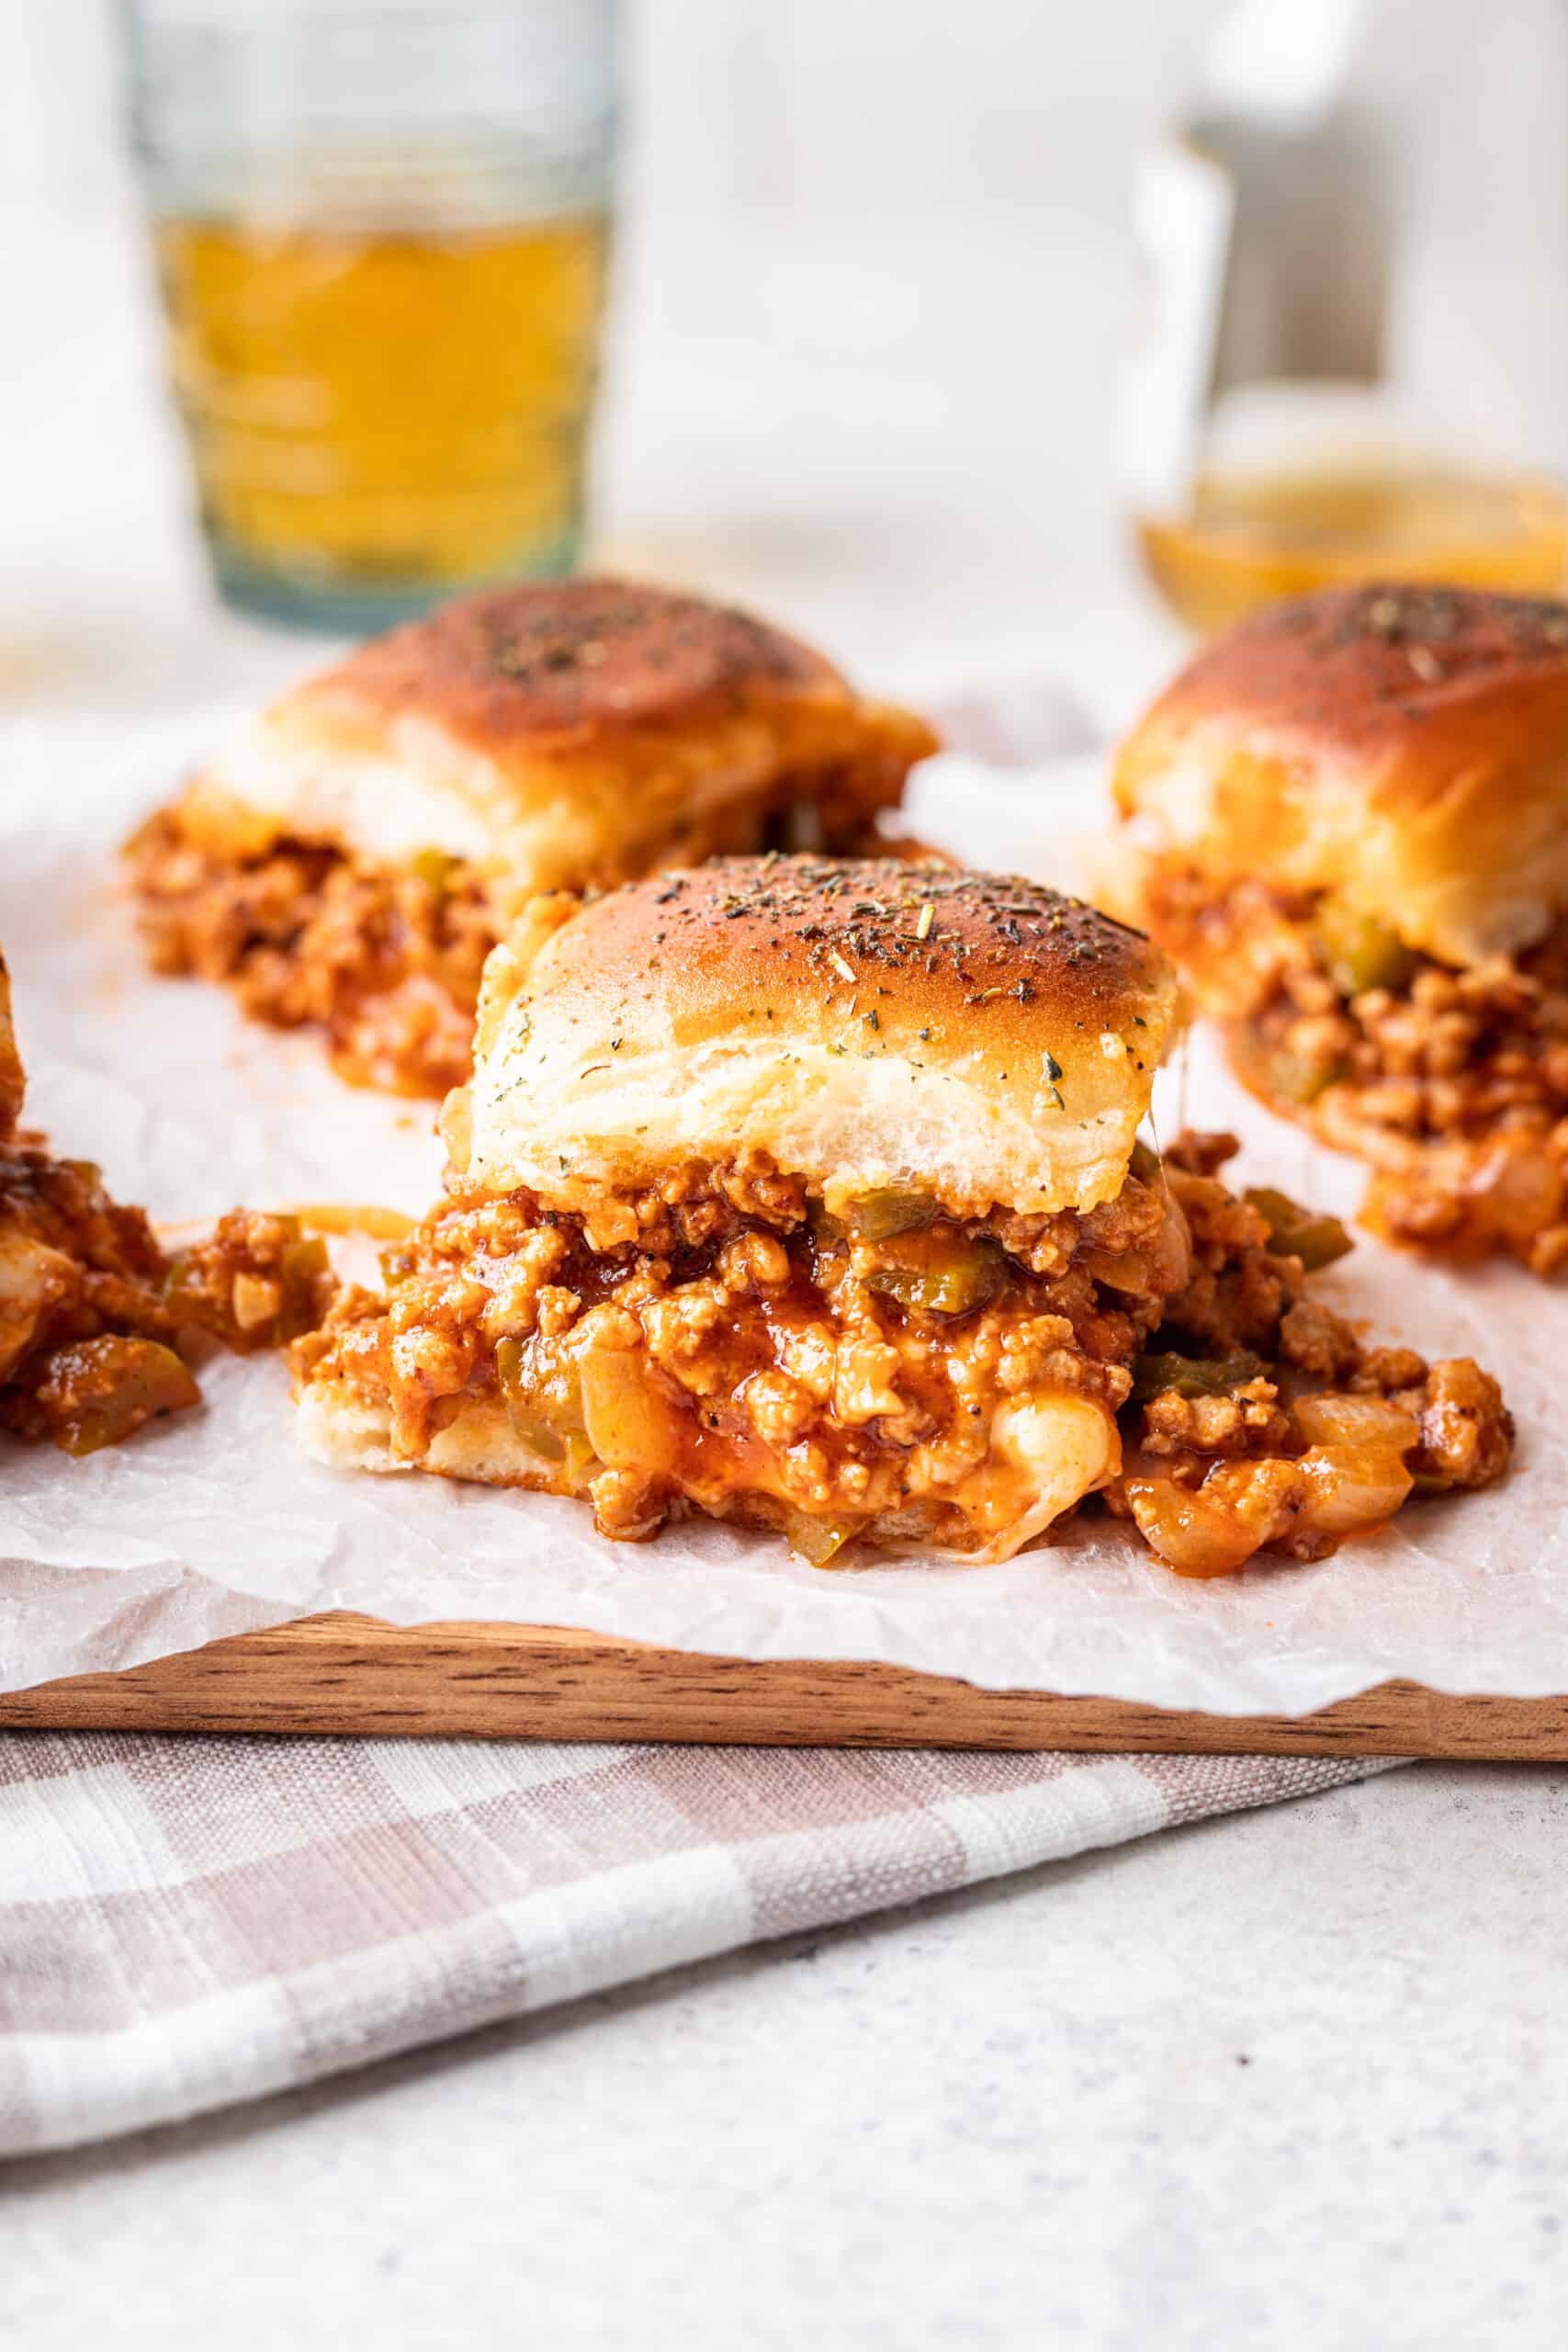 Sloppy joe sliders on a serving tray showing the filling falling out.